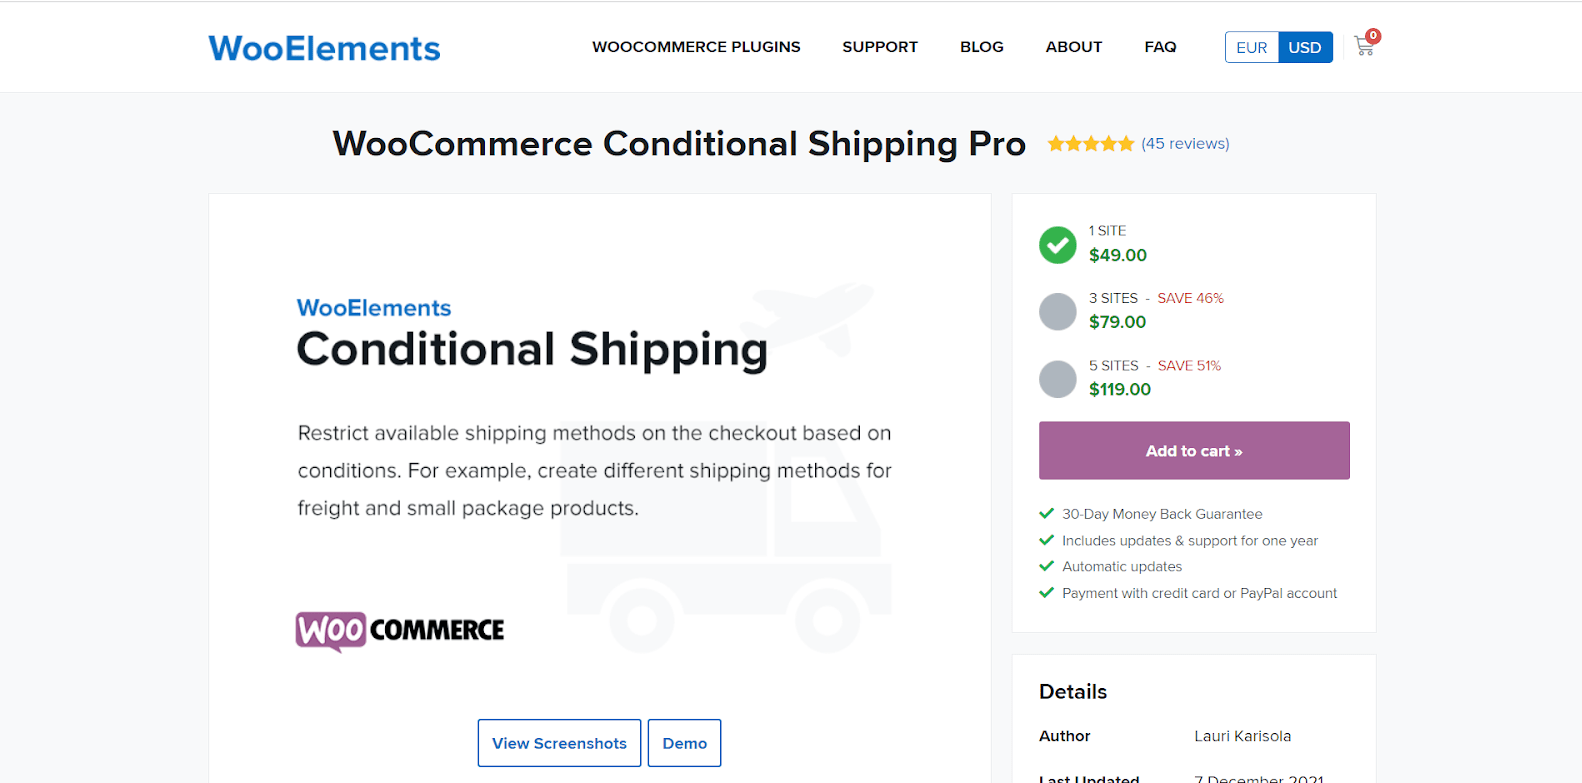 WooCommerce Conditional Shipping Pro